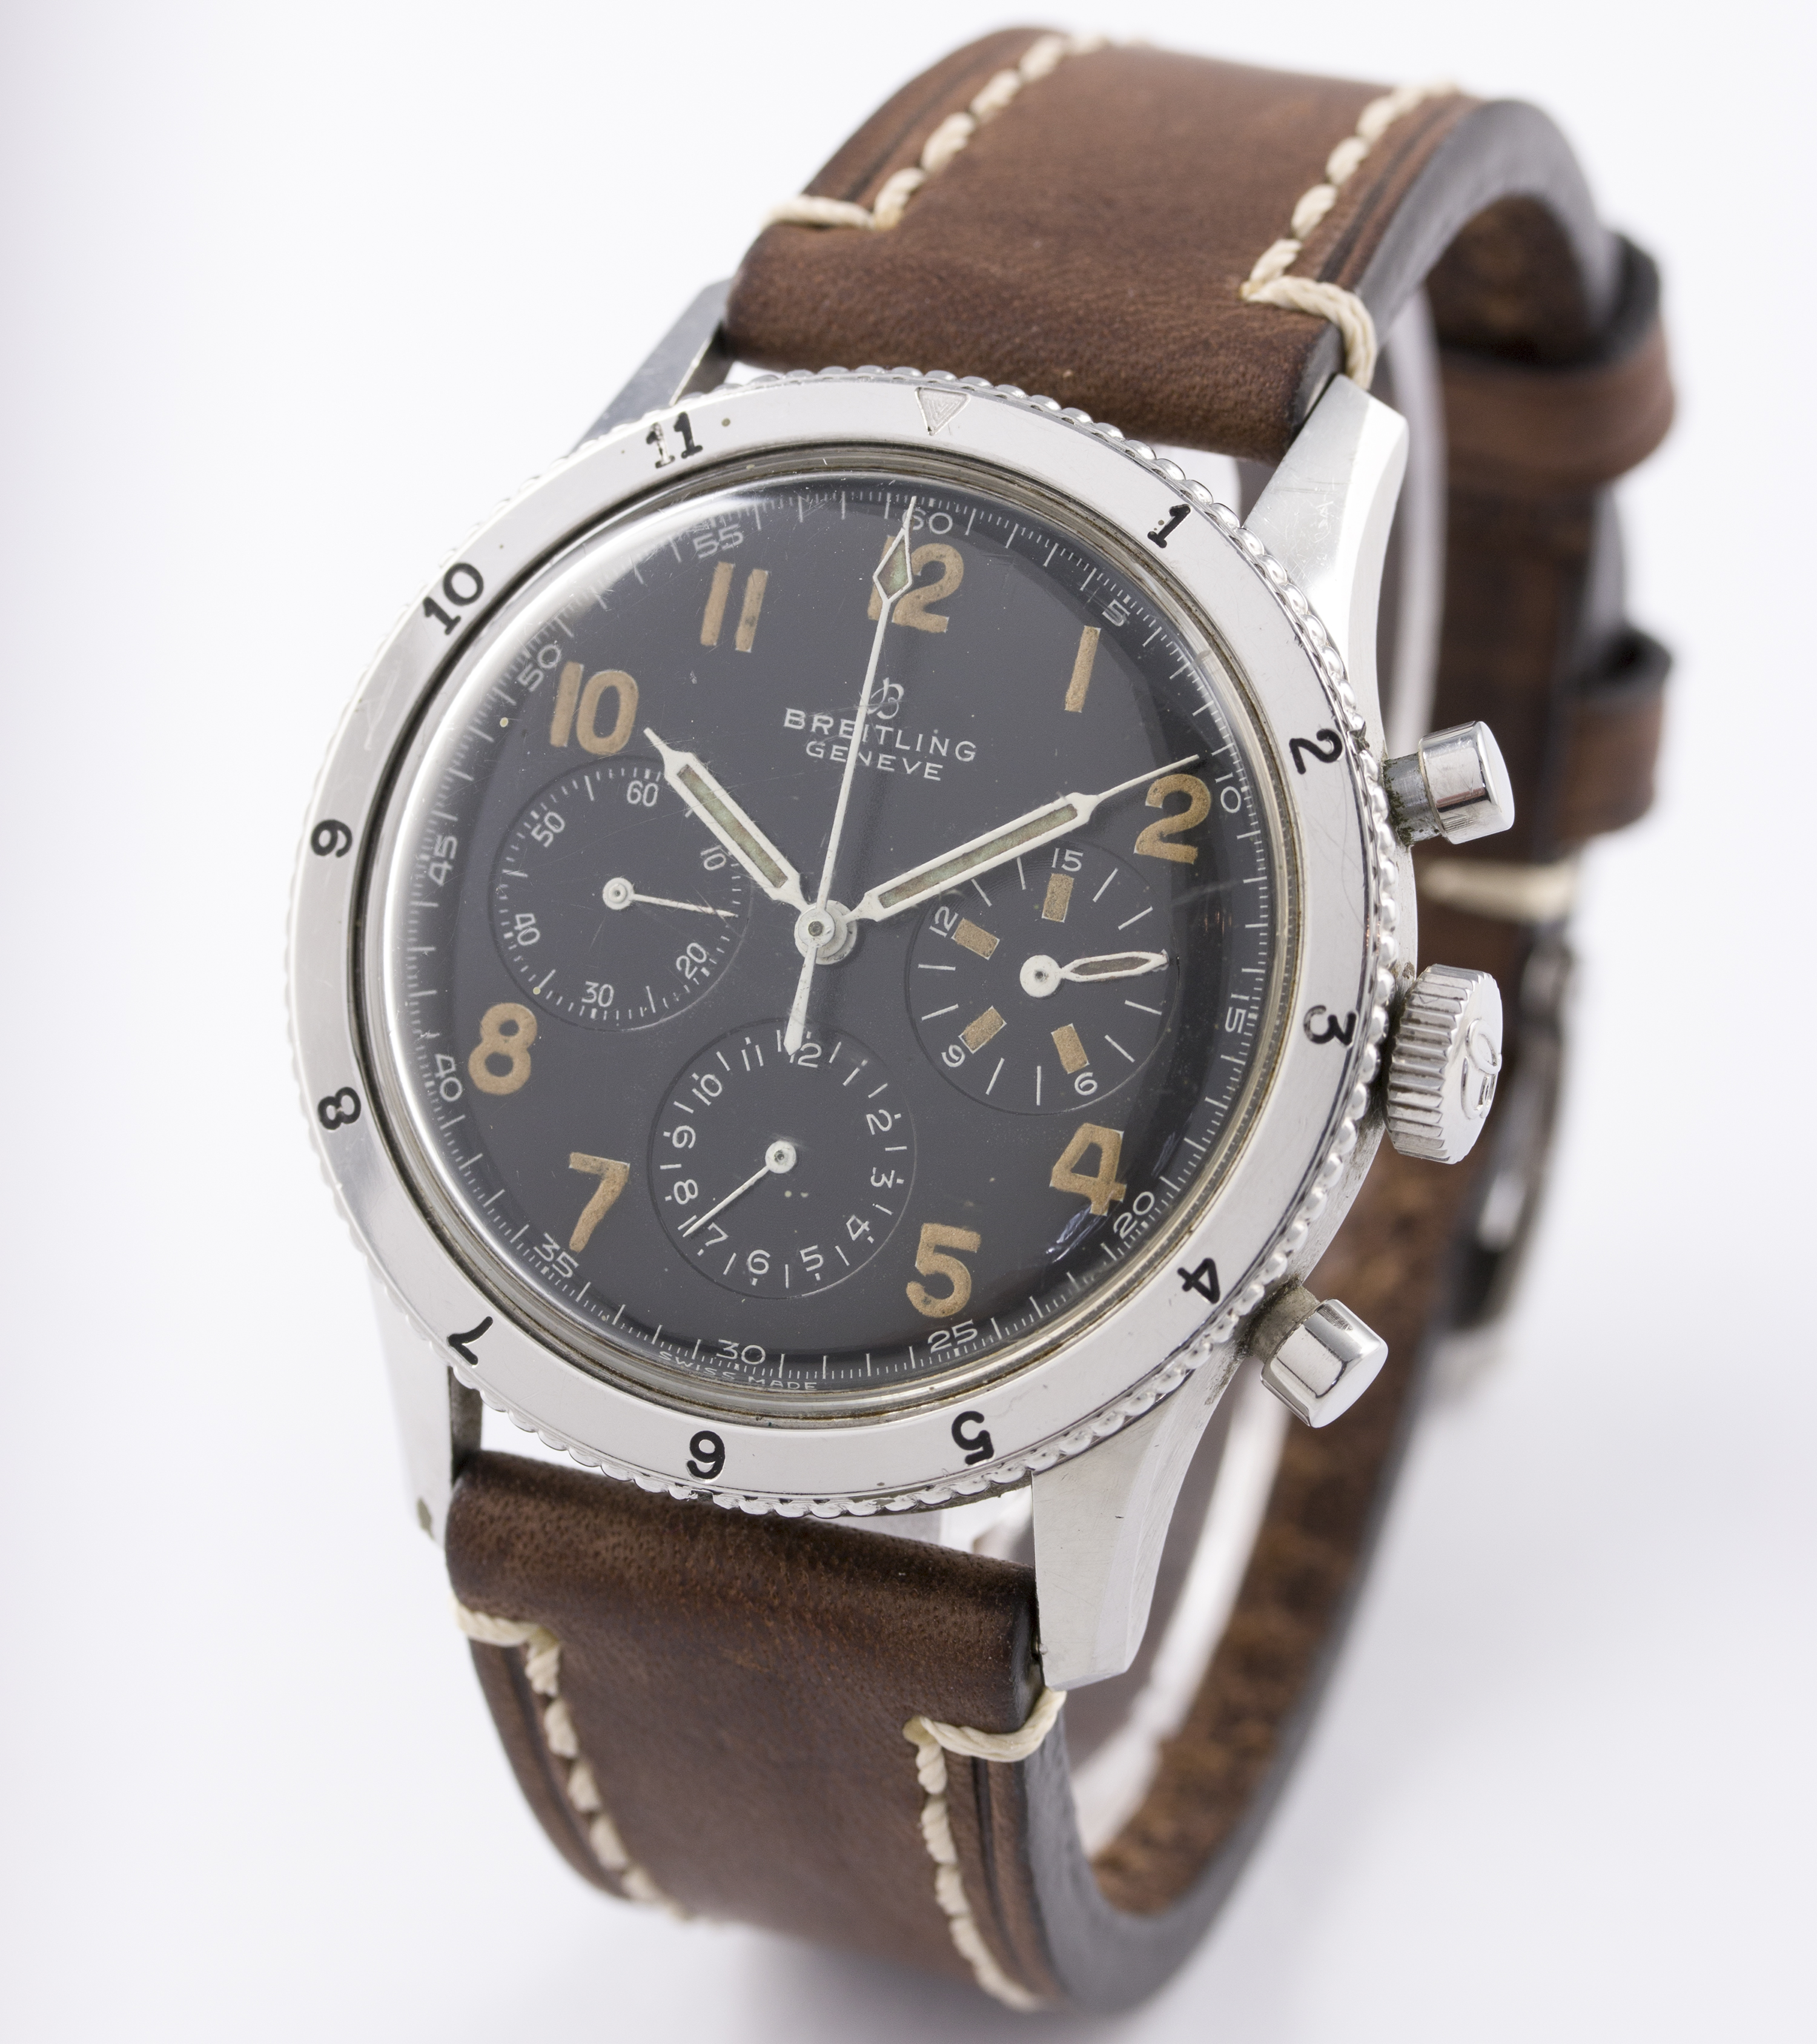 A RARE GENTLEMAN'S STAINLESS STEEL BREITLING AVI CHRONOGRAPH WRIST WATCH CIRCA 1950s, REF. 765 FIRST - Image 3 of 9